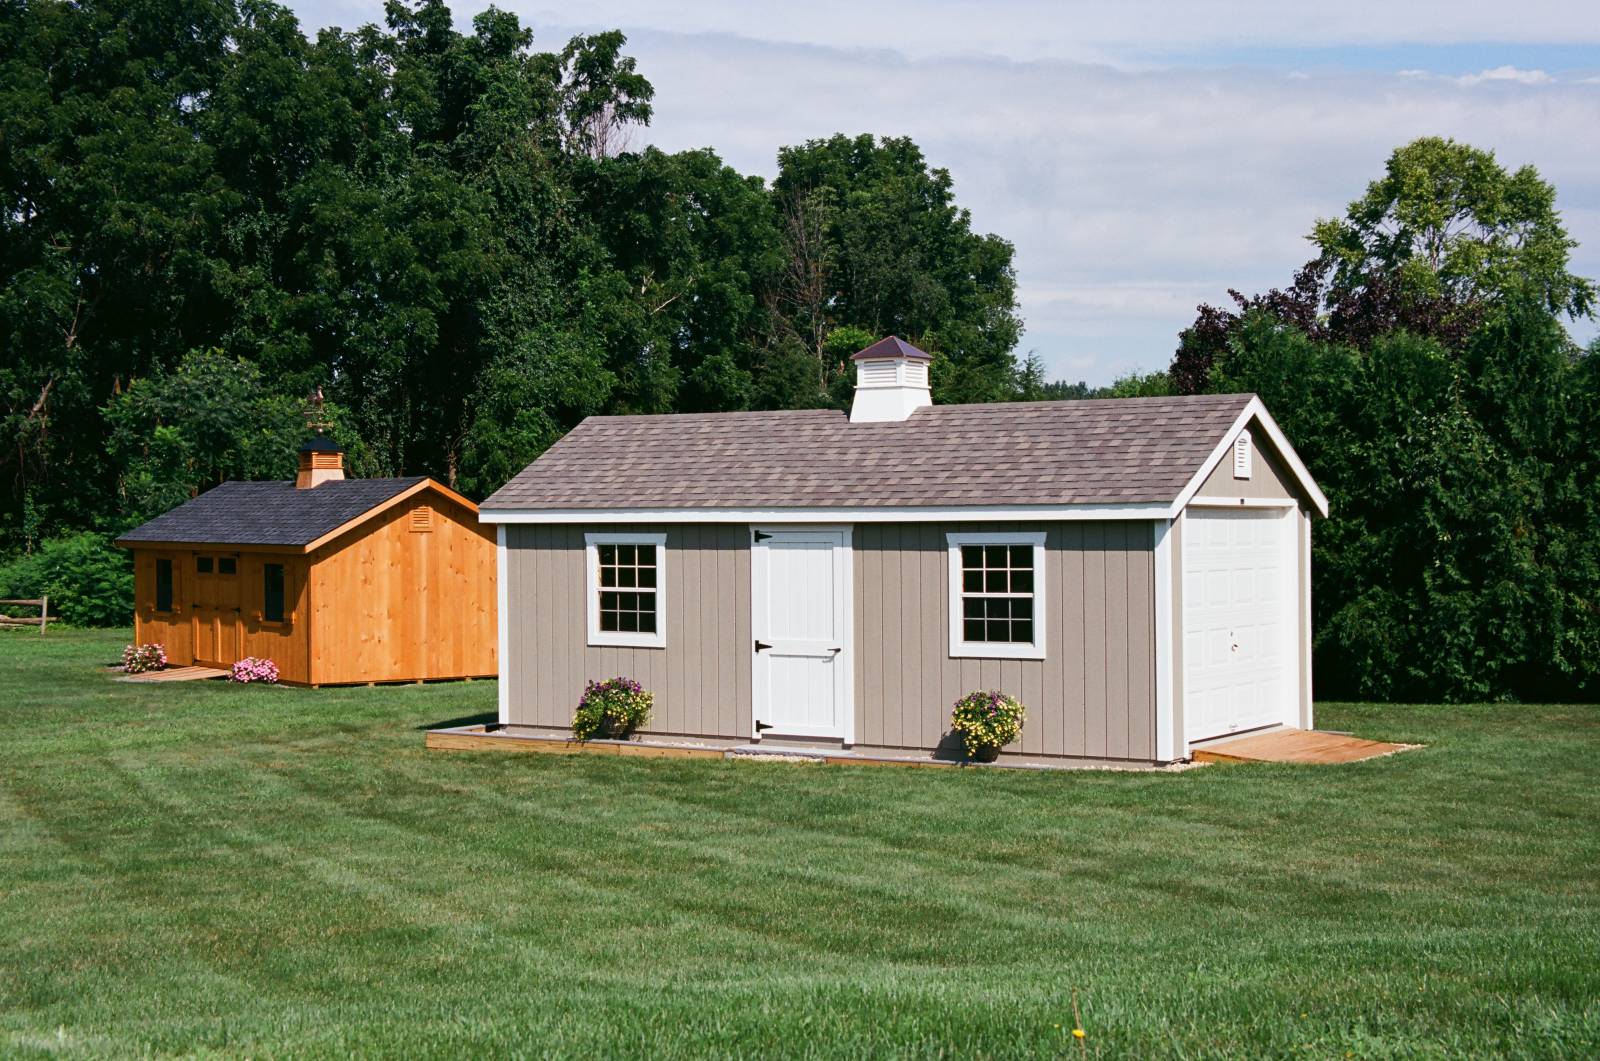 Quality is contagious. These neighbors chose The Barn Yard.